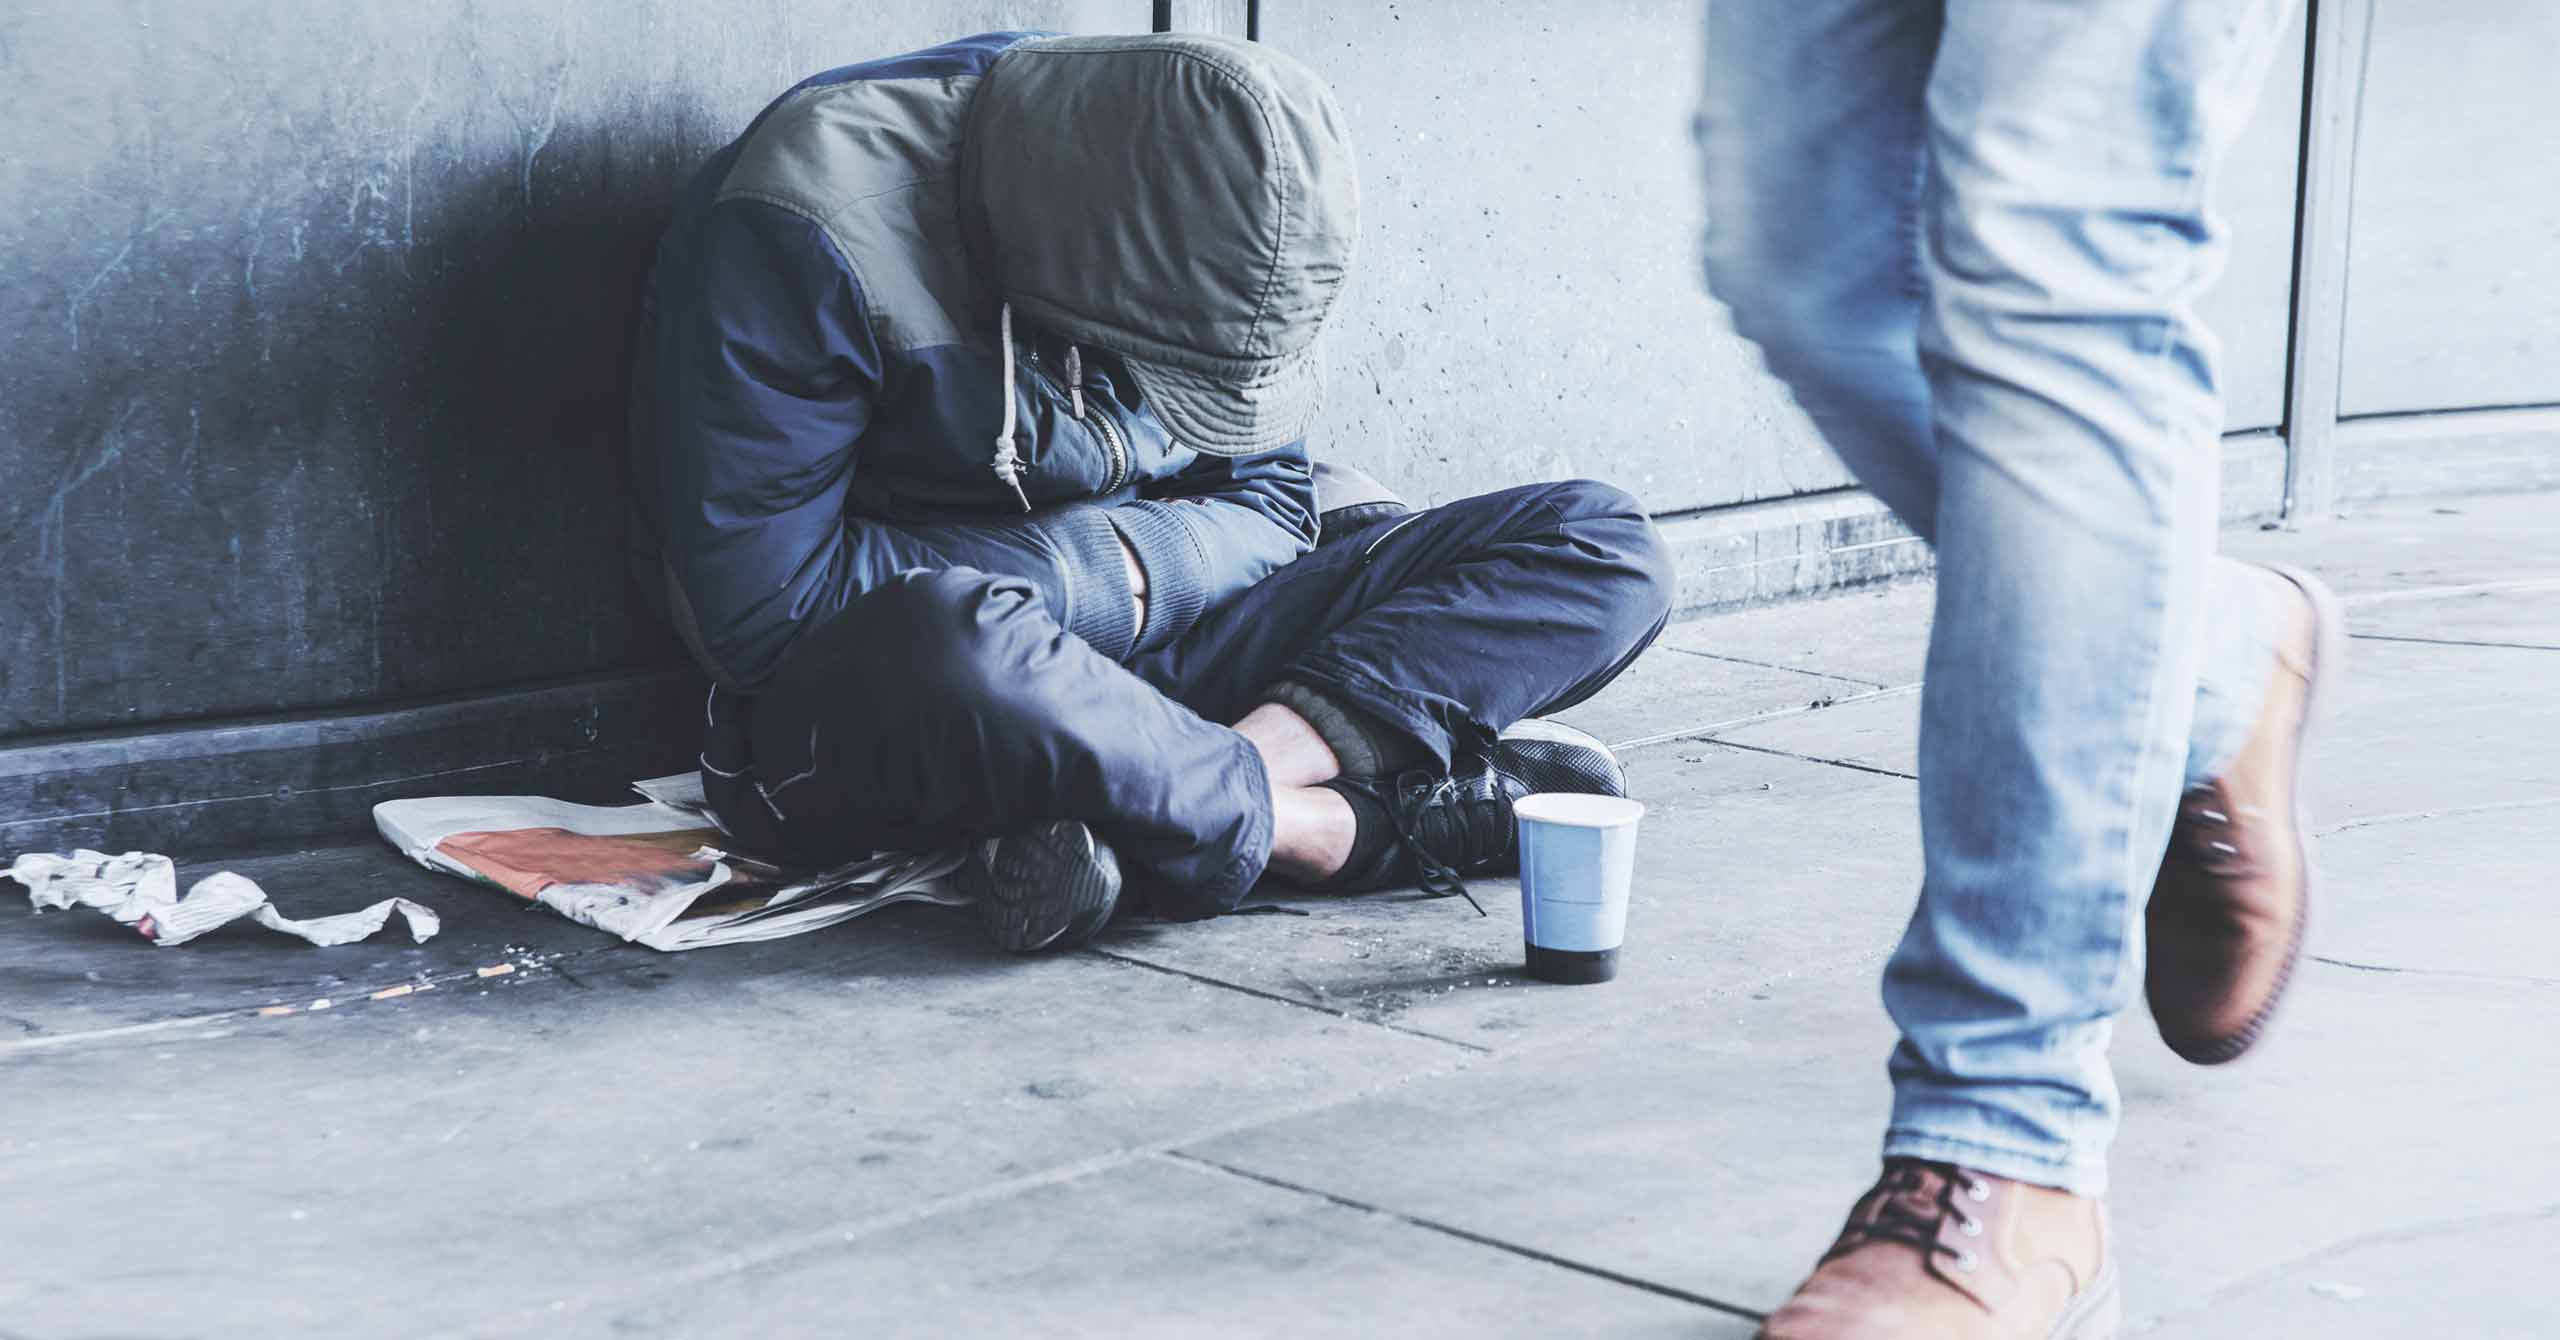 Medicaid expansion is delivering coverage – and care – for homeless people affected by serious mental illness, alcohol, or illicit drug use disorders. The catch? Your state actually has to do it.